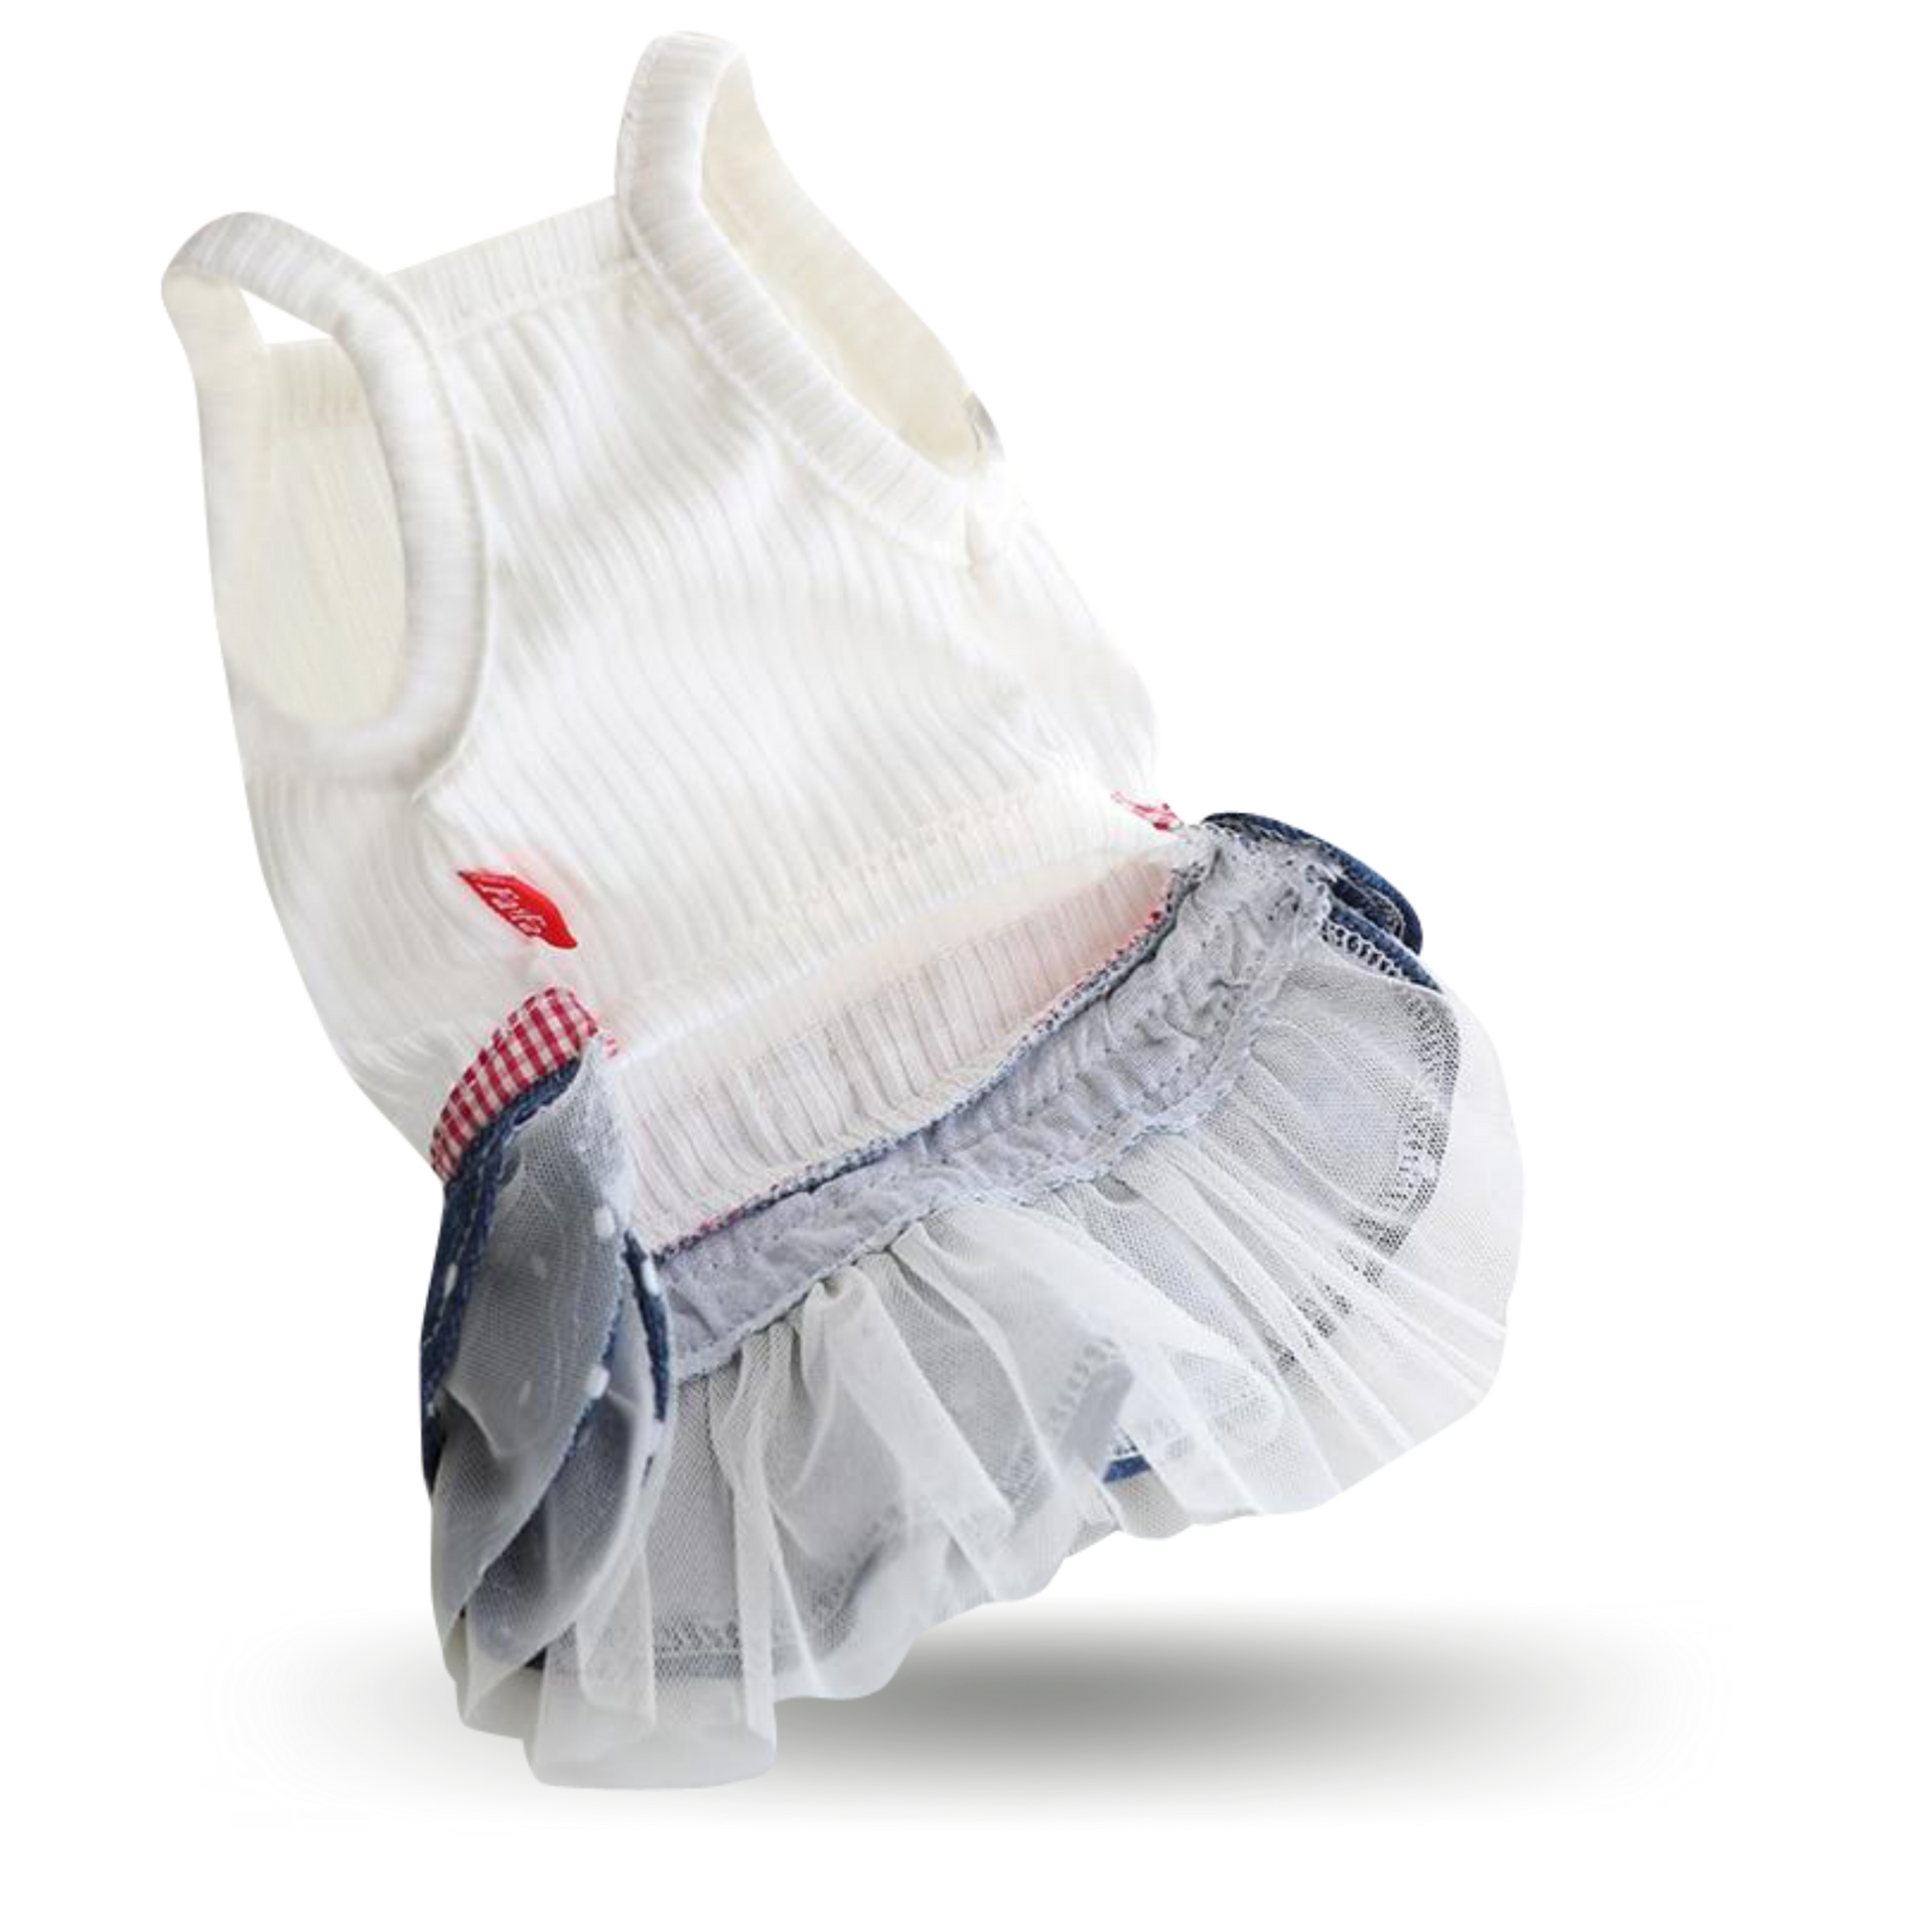 Soft ribbed cotton bodice with a cute little star patch, red plaid ribbon at the waist and blue polka-dot denim and white tulle layered RaRa skirt